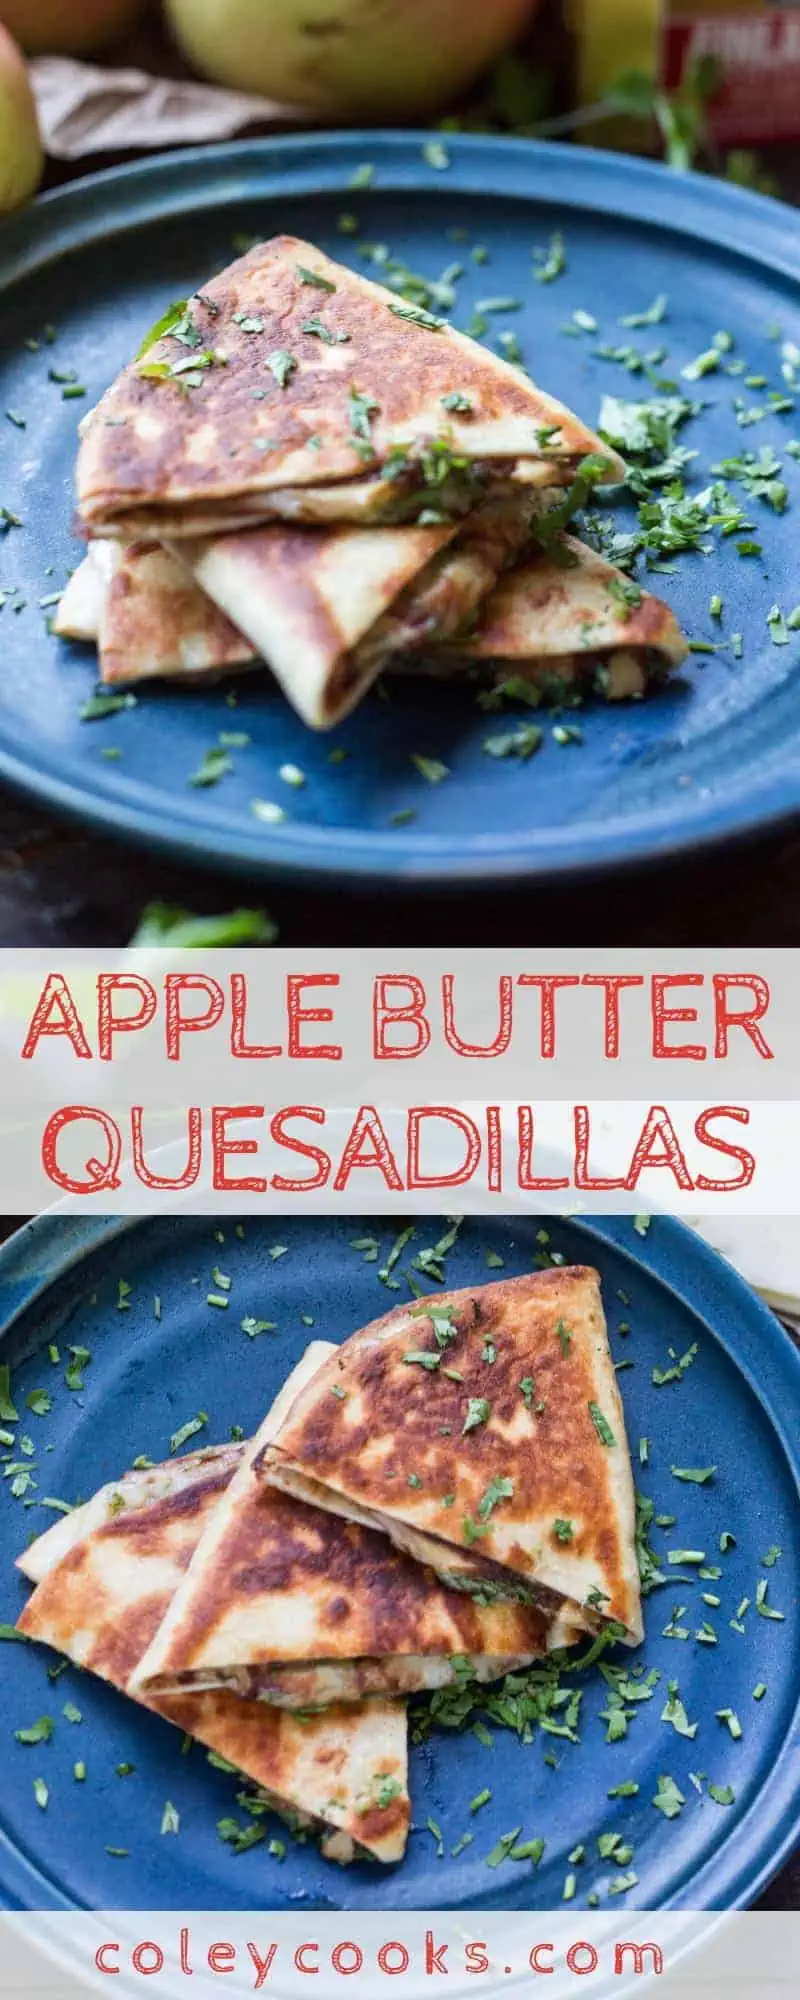 APPLE BUTTER QUESADILLAS | This quick and easy recipe is a sweet, salty, and addictive snack! Great for kids as lunch or an after school snack!. #easy #apple #applebutter #quesadilla #pepperjack #snack #afterschool #kids #recipe | ColeyCooks.com